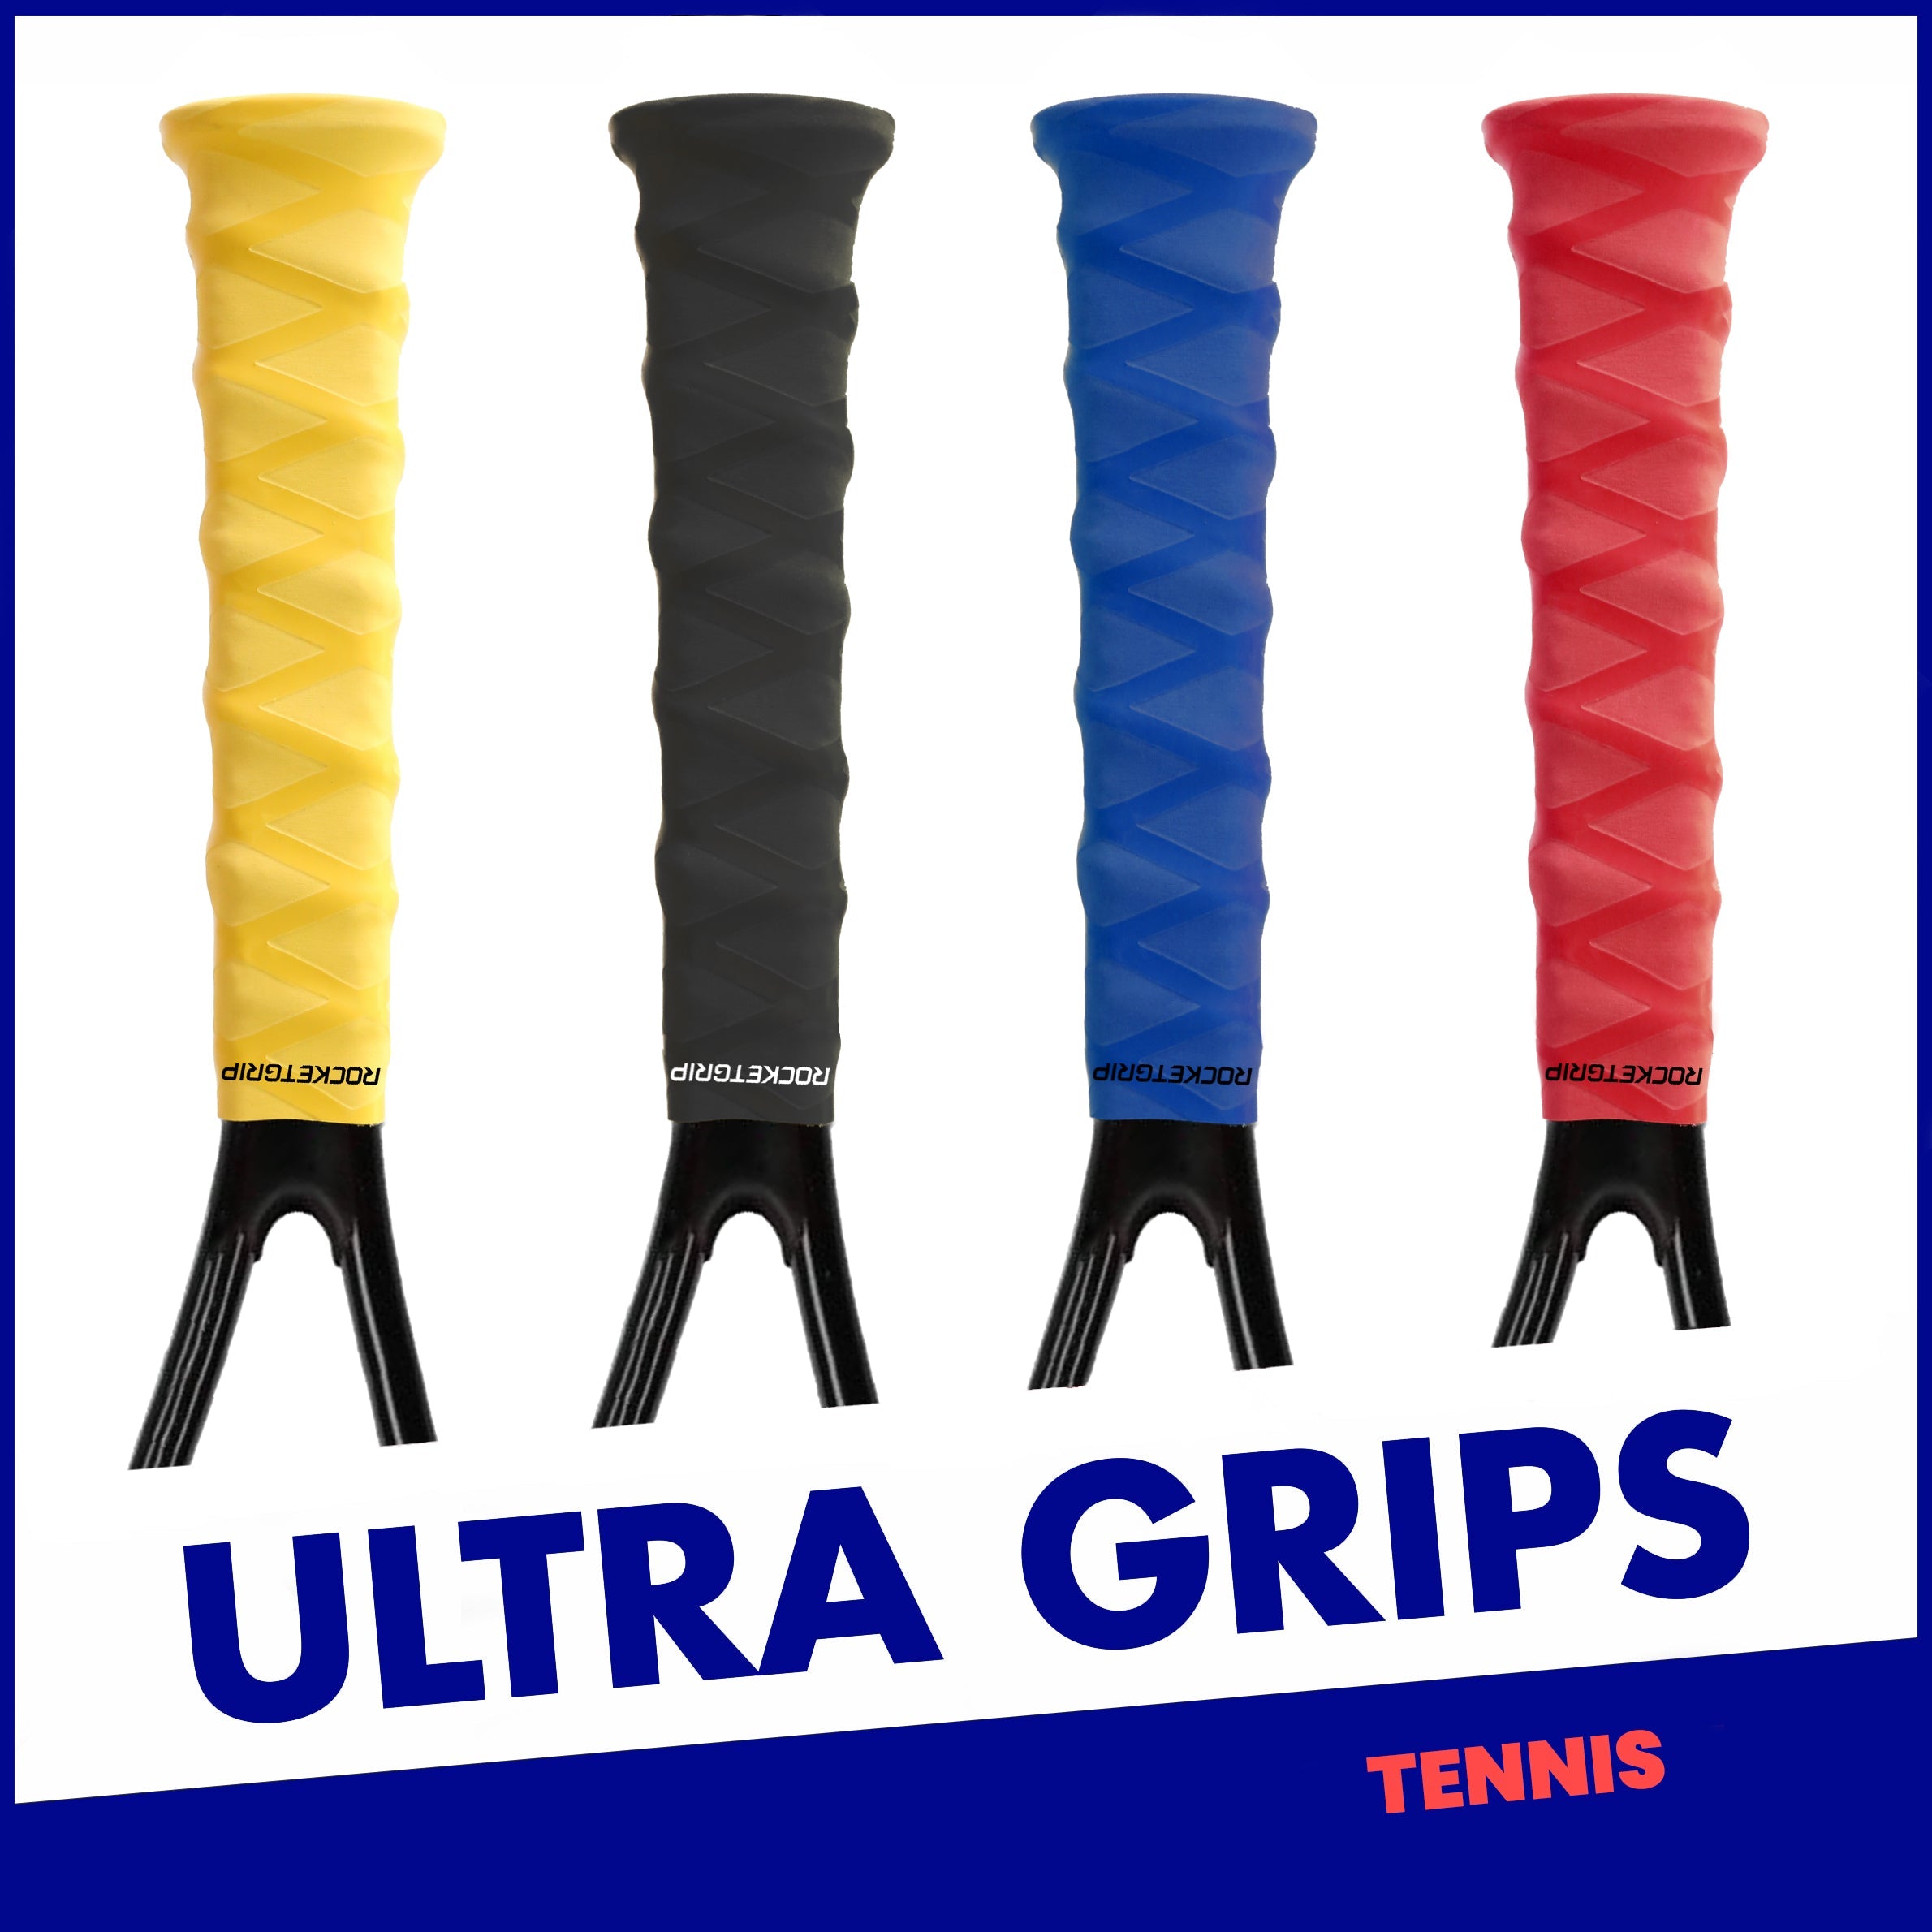 Padel Overgrip - Multiple Pack Options Available - Padel Tennis Racket Grip  Tape - Extra Grip & High Sweat Absorption - Non-Slip & Soft Touch - Precut